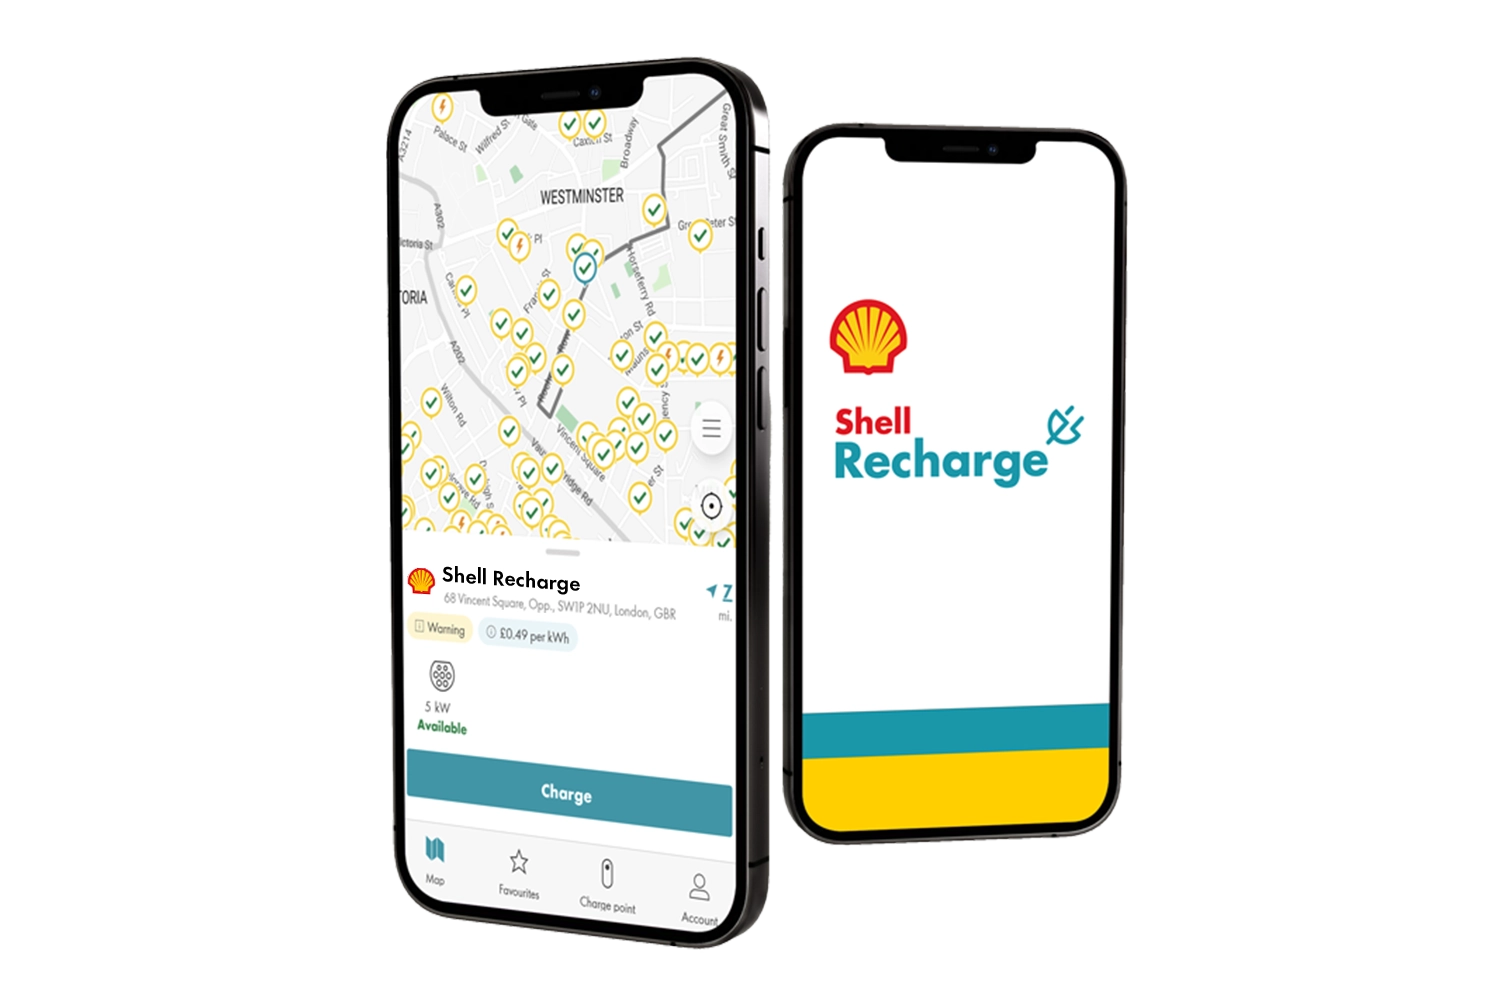 Two smartphone screens showing the Shell Recharge App interface for locating ubitricity-operated EV charging stations in the UK.